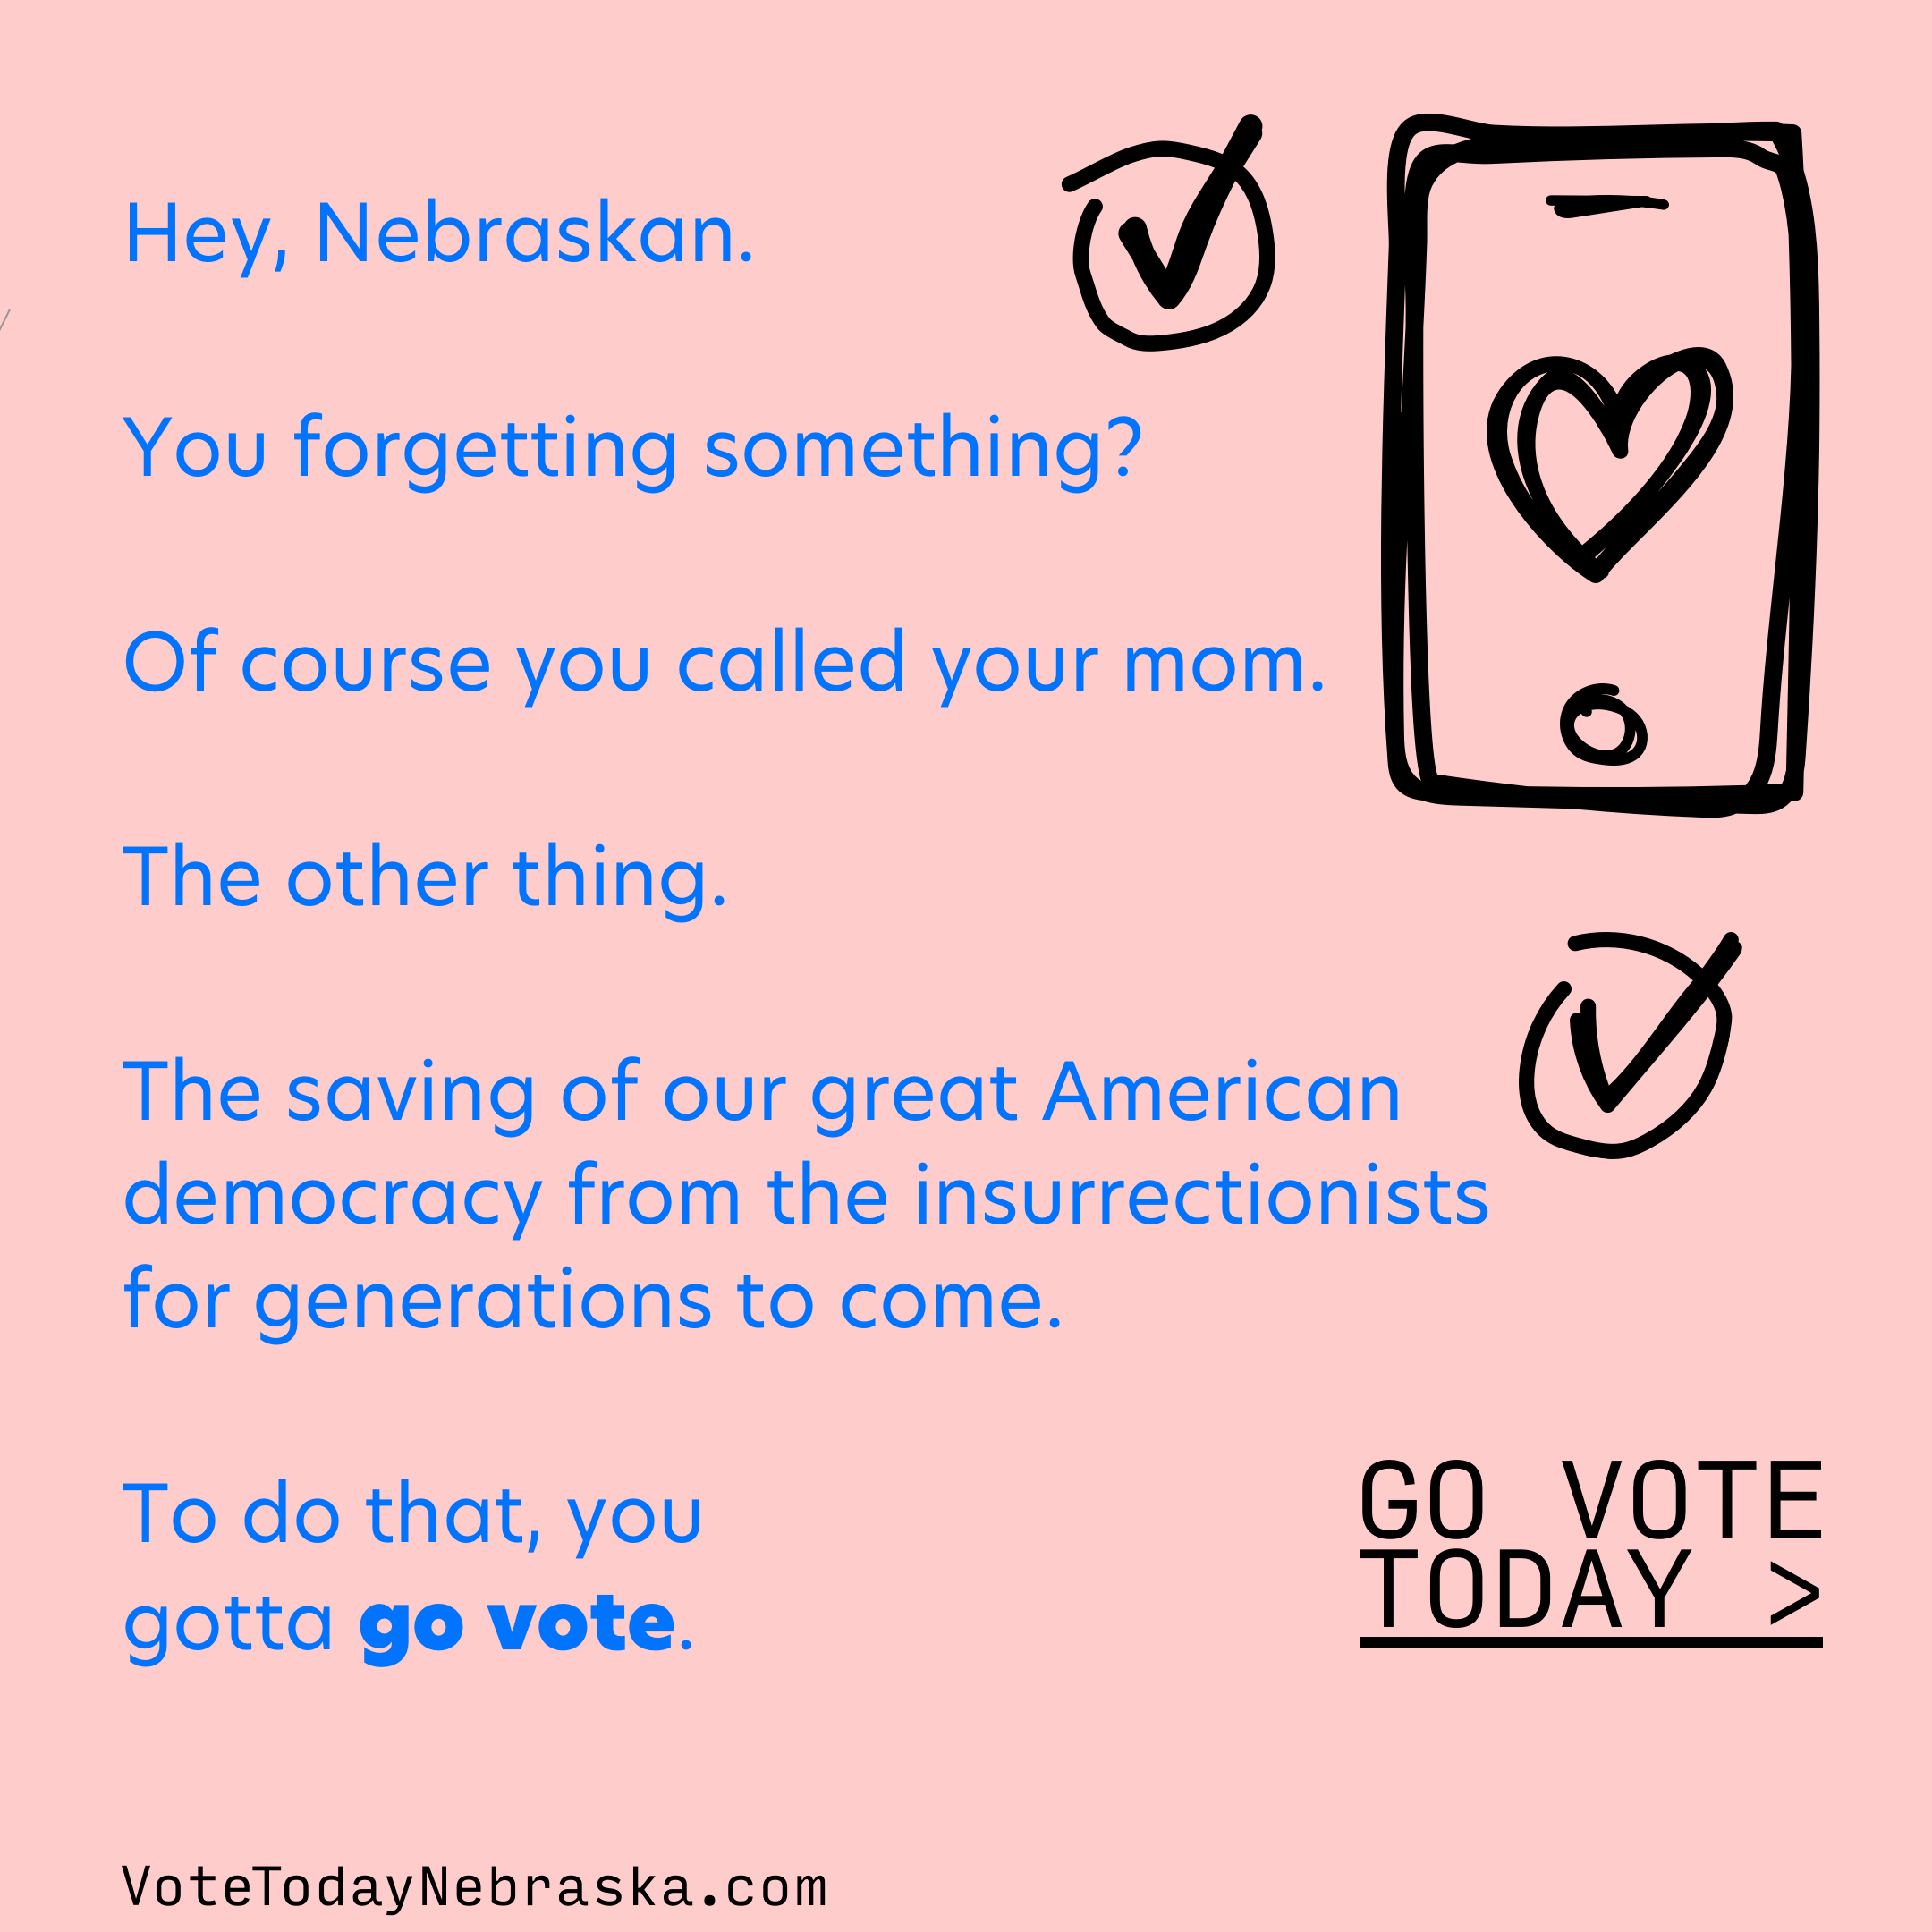 The saving of our great American democracy from the Insurrectionists for generations to come. Go Vote Today.